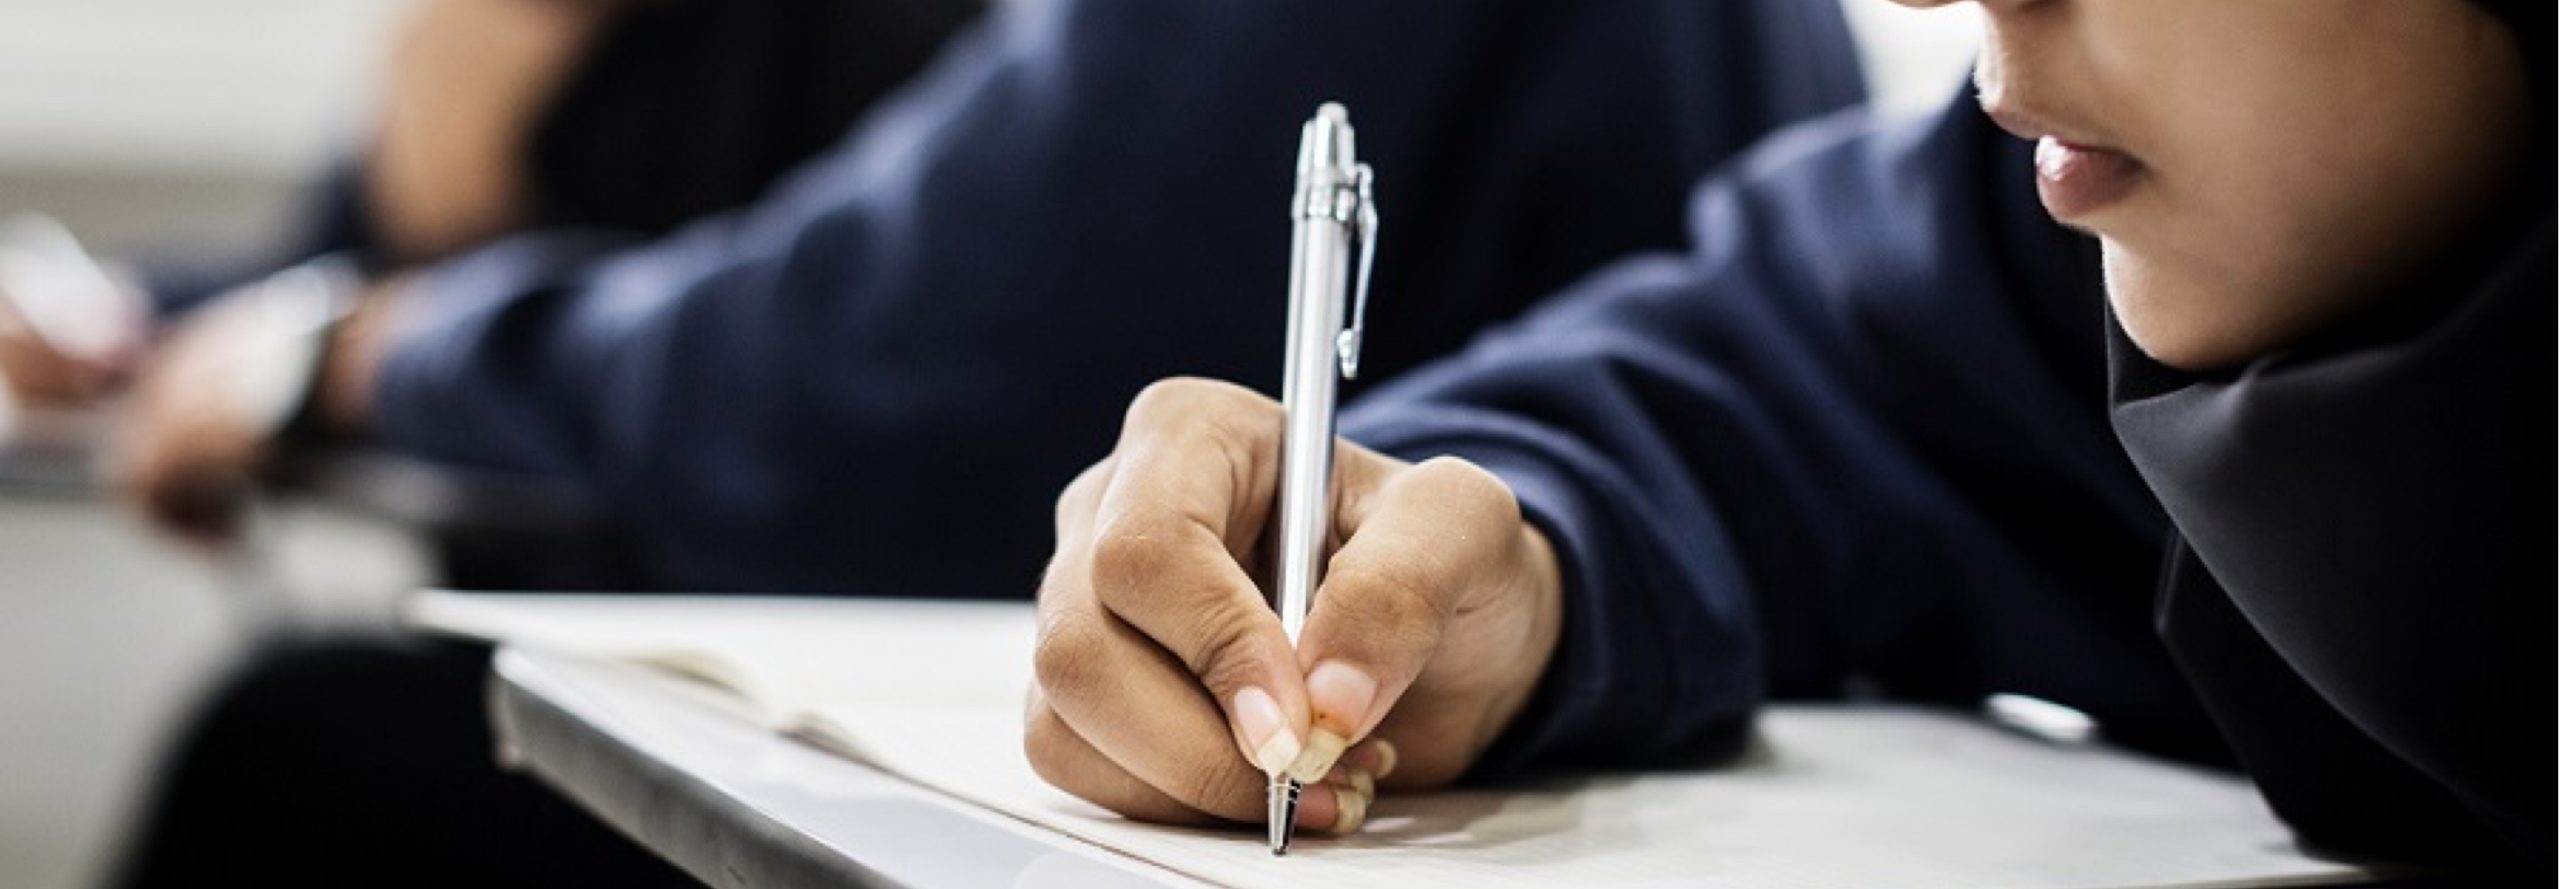 A student writing on a notebook